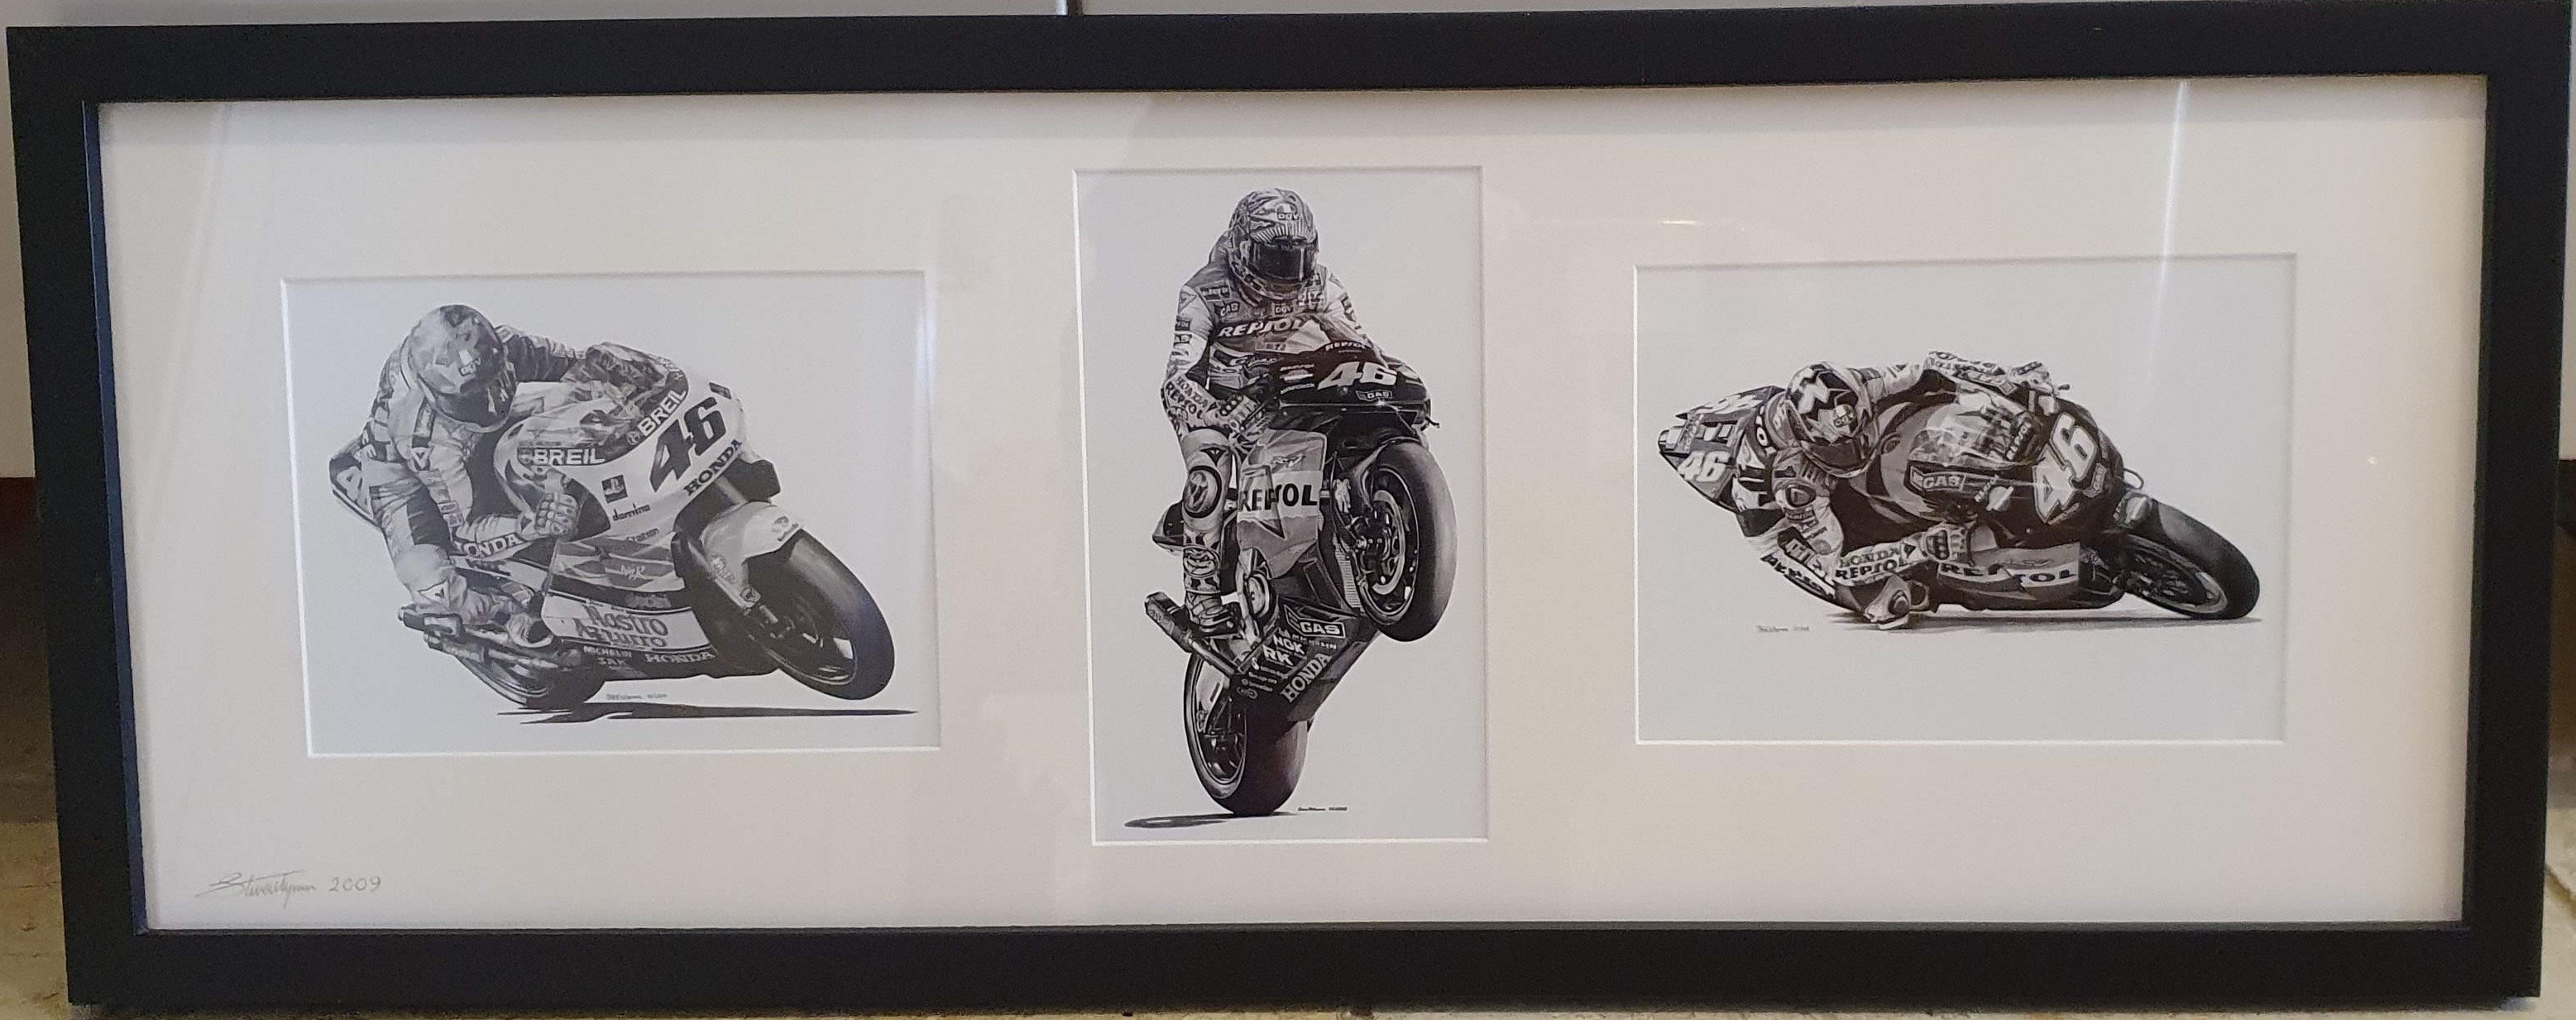 VR46: 3 x black and white sketches